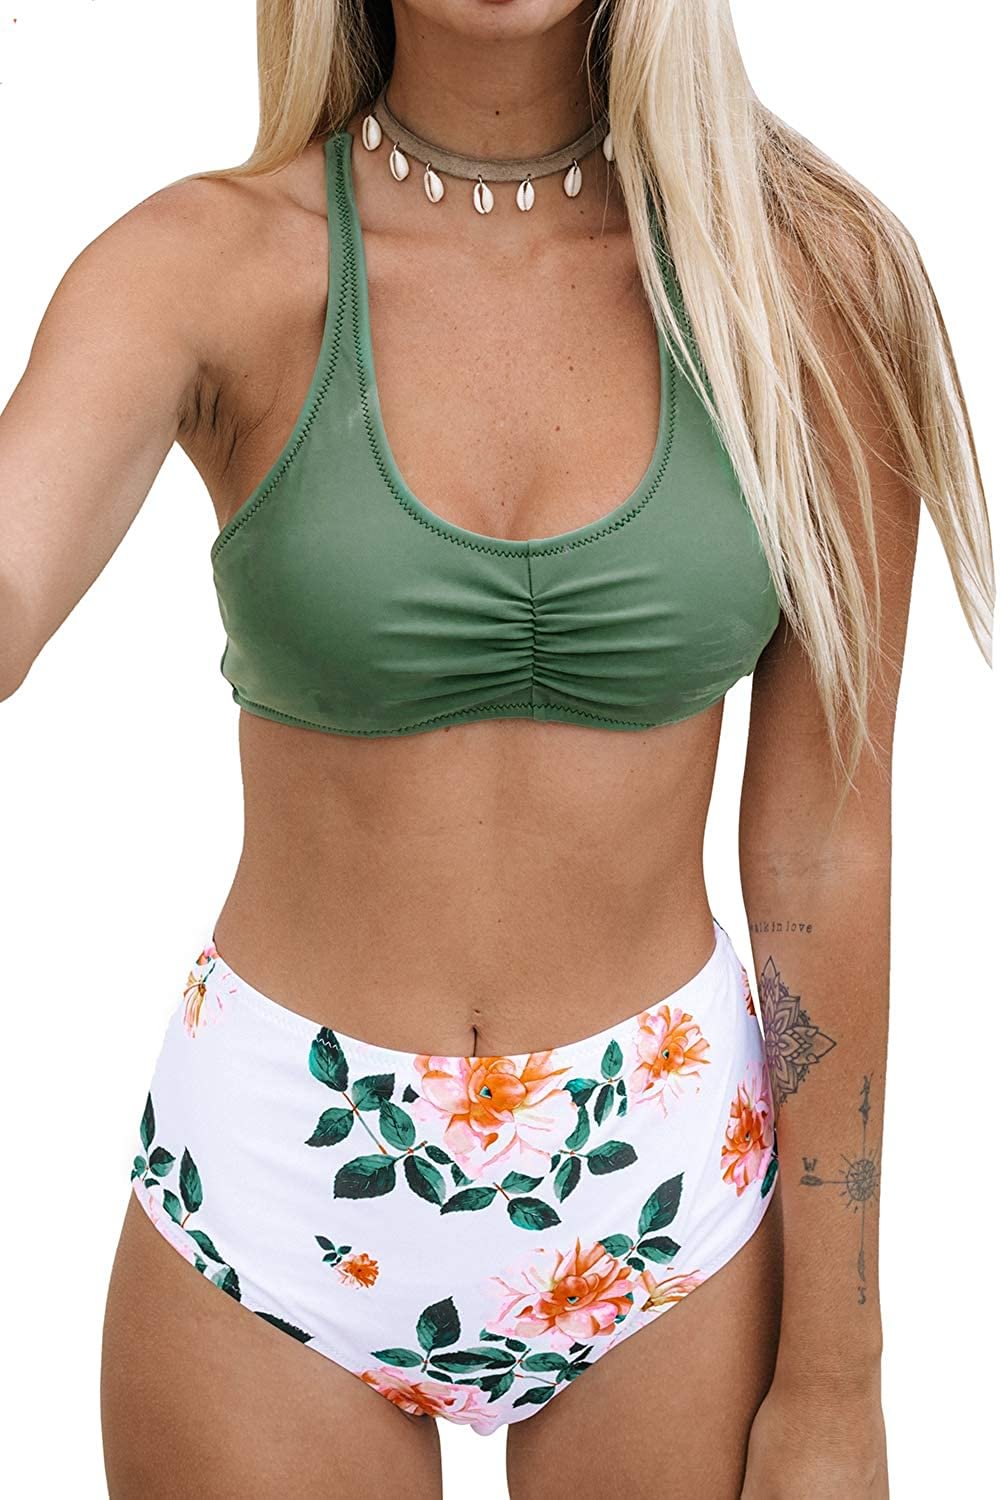 Women's High Waisted Bikini Floral Lace Up Two Piece Swimsuits